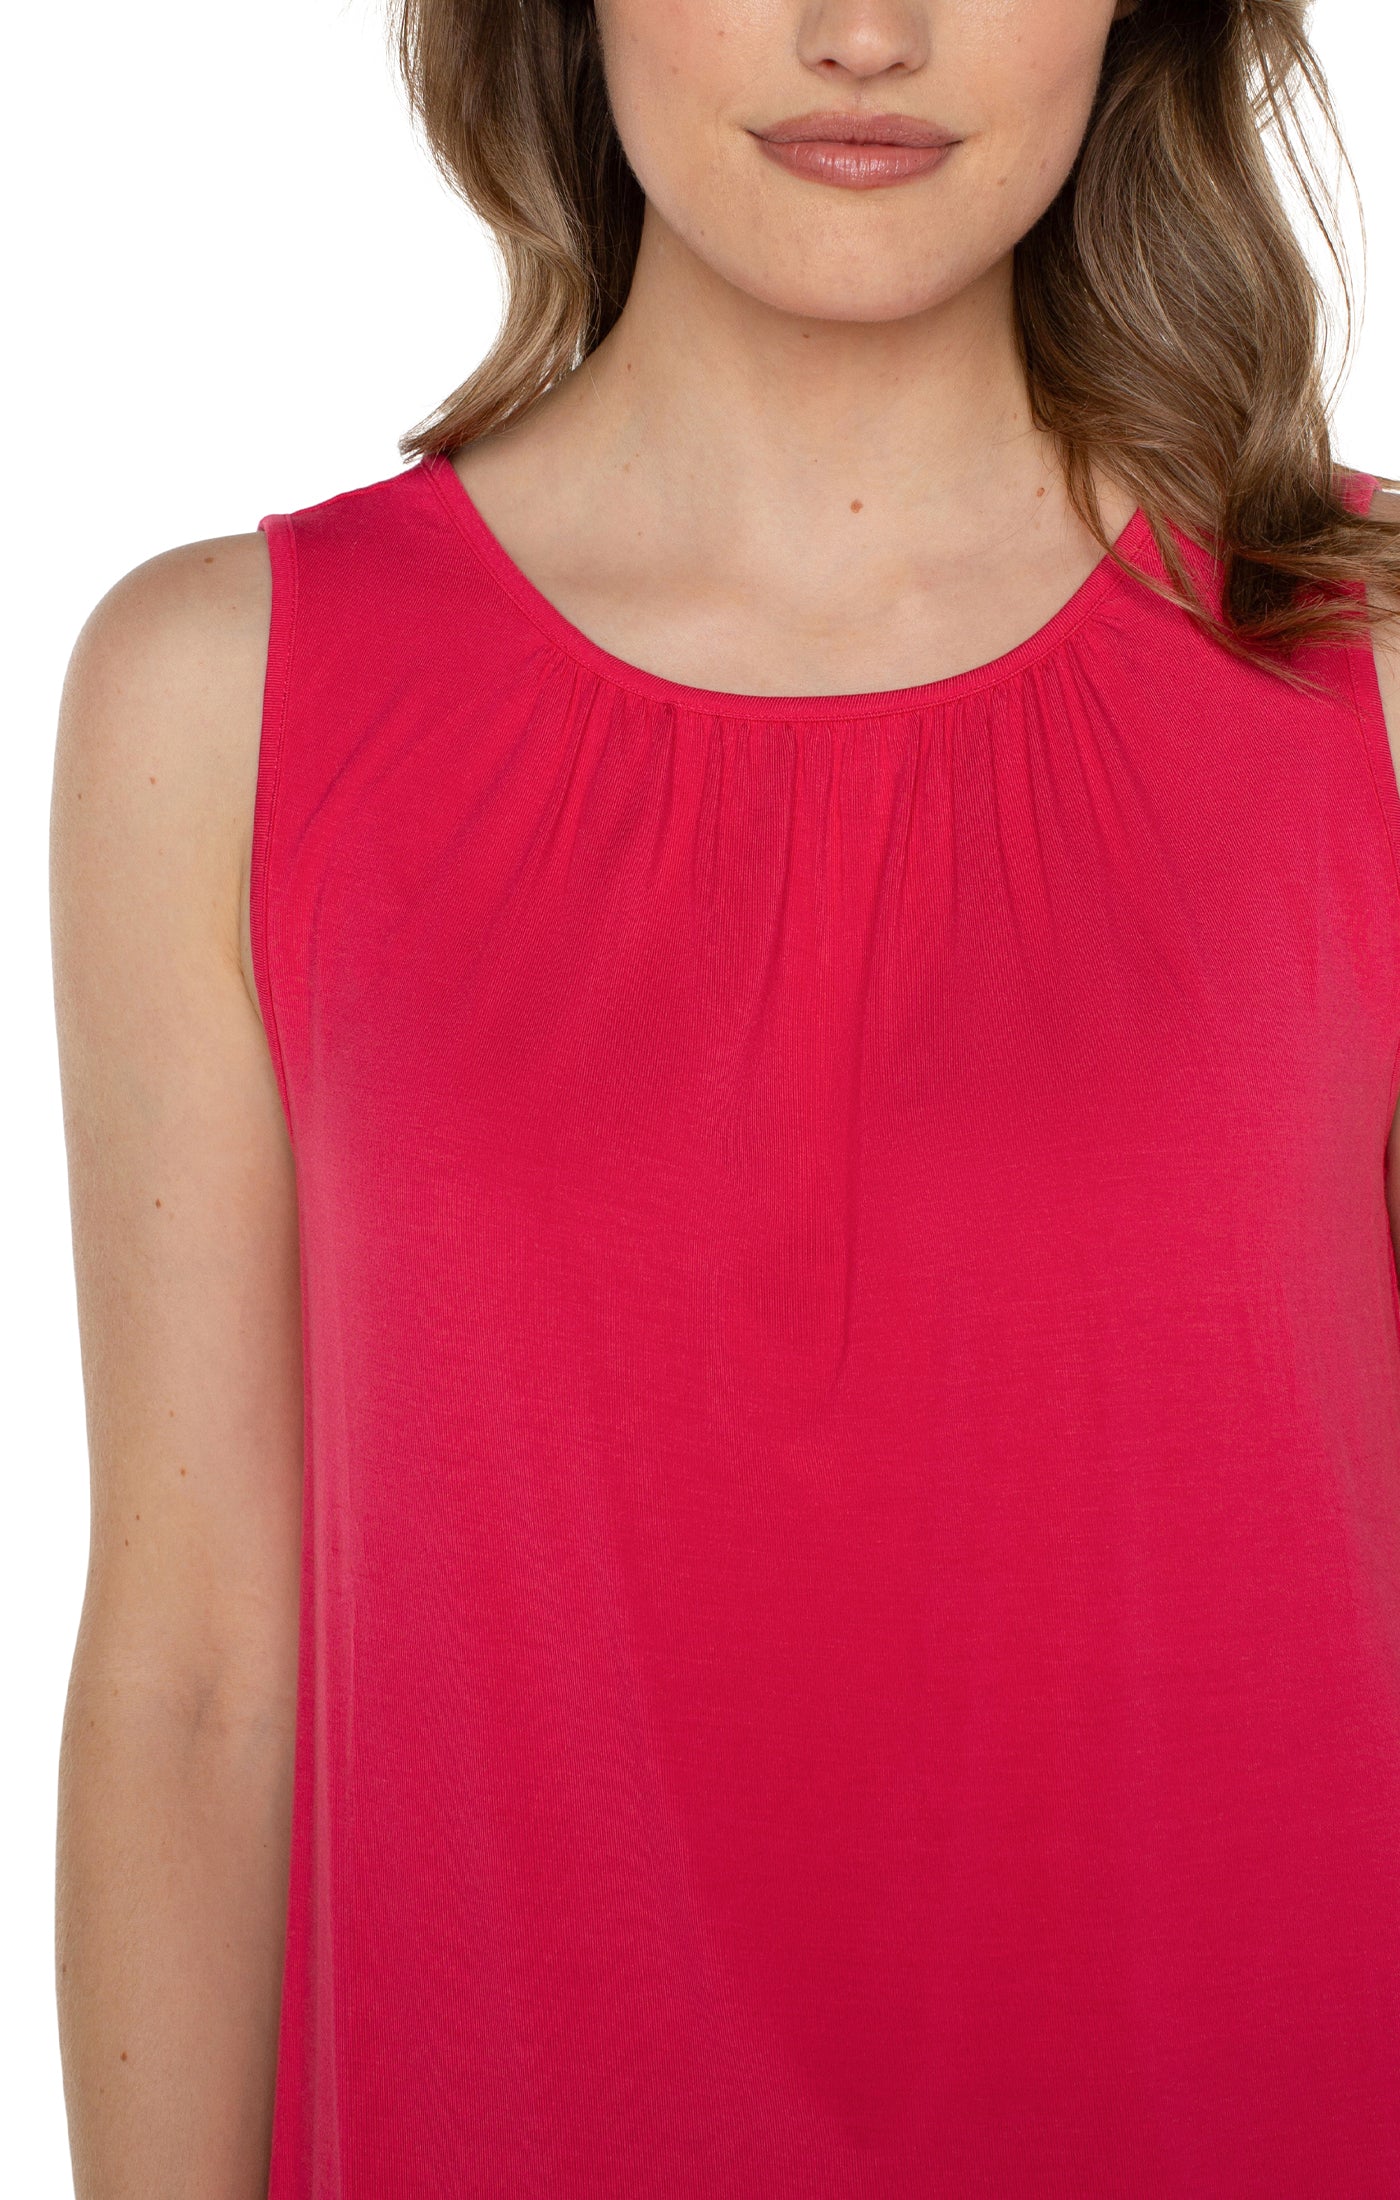 LVP Sleeveless Knit Top - Pink Punch Close Up View